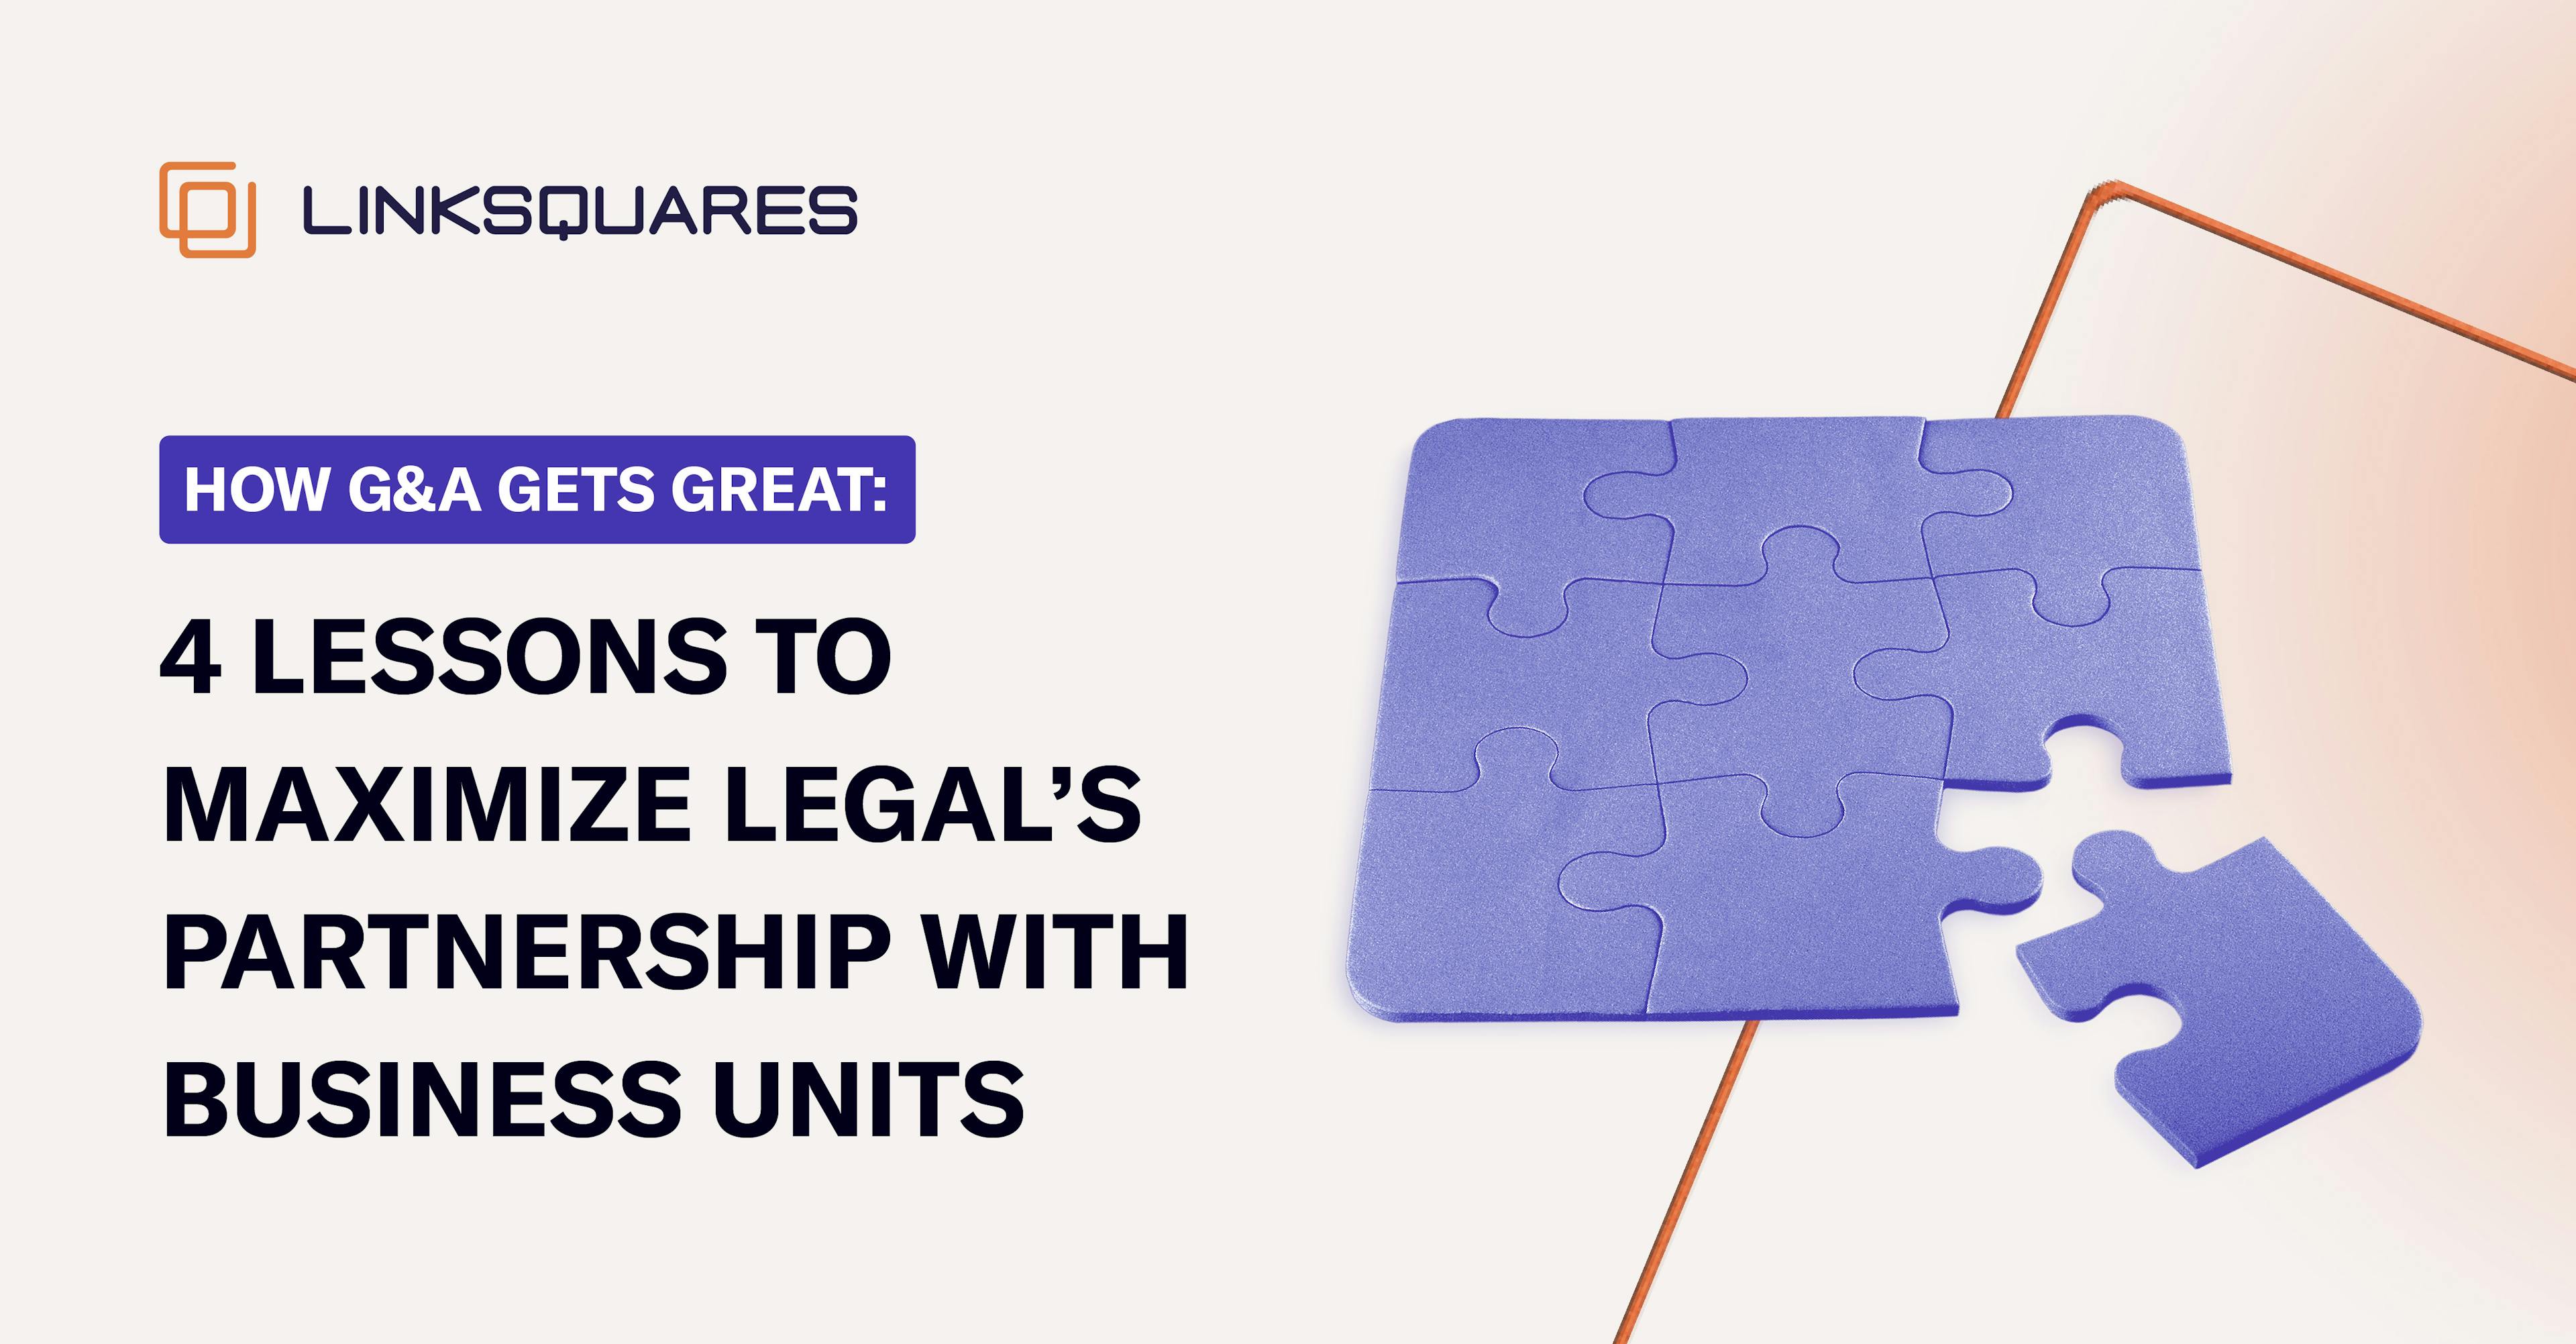 eBook: How G&A Gets Great: 4 Lessons to Maximize Legal’s Partnership With Business Units